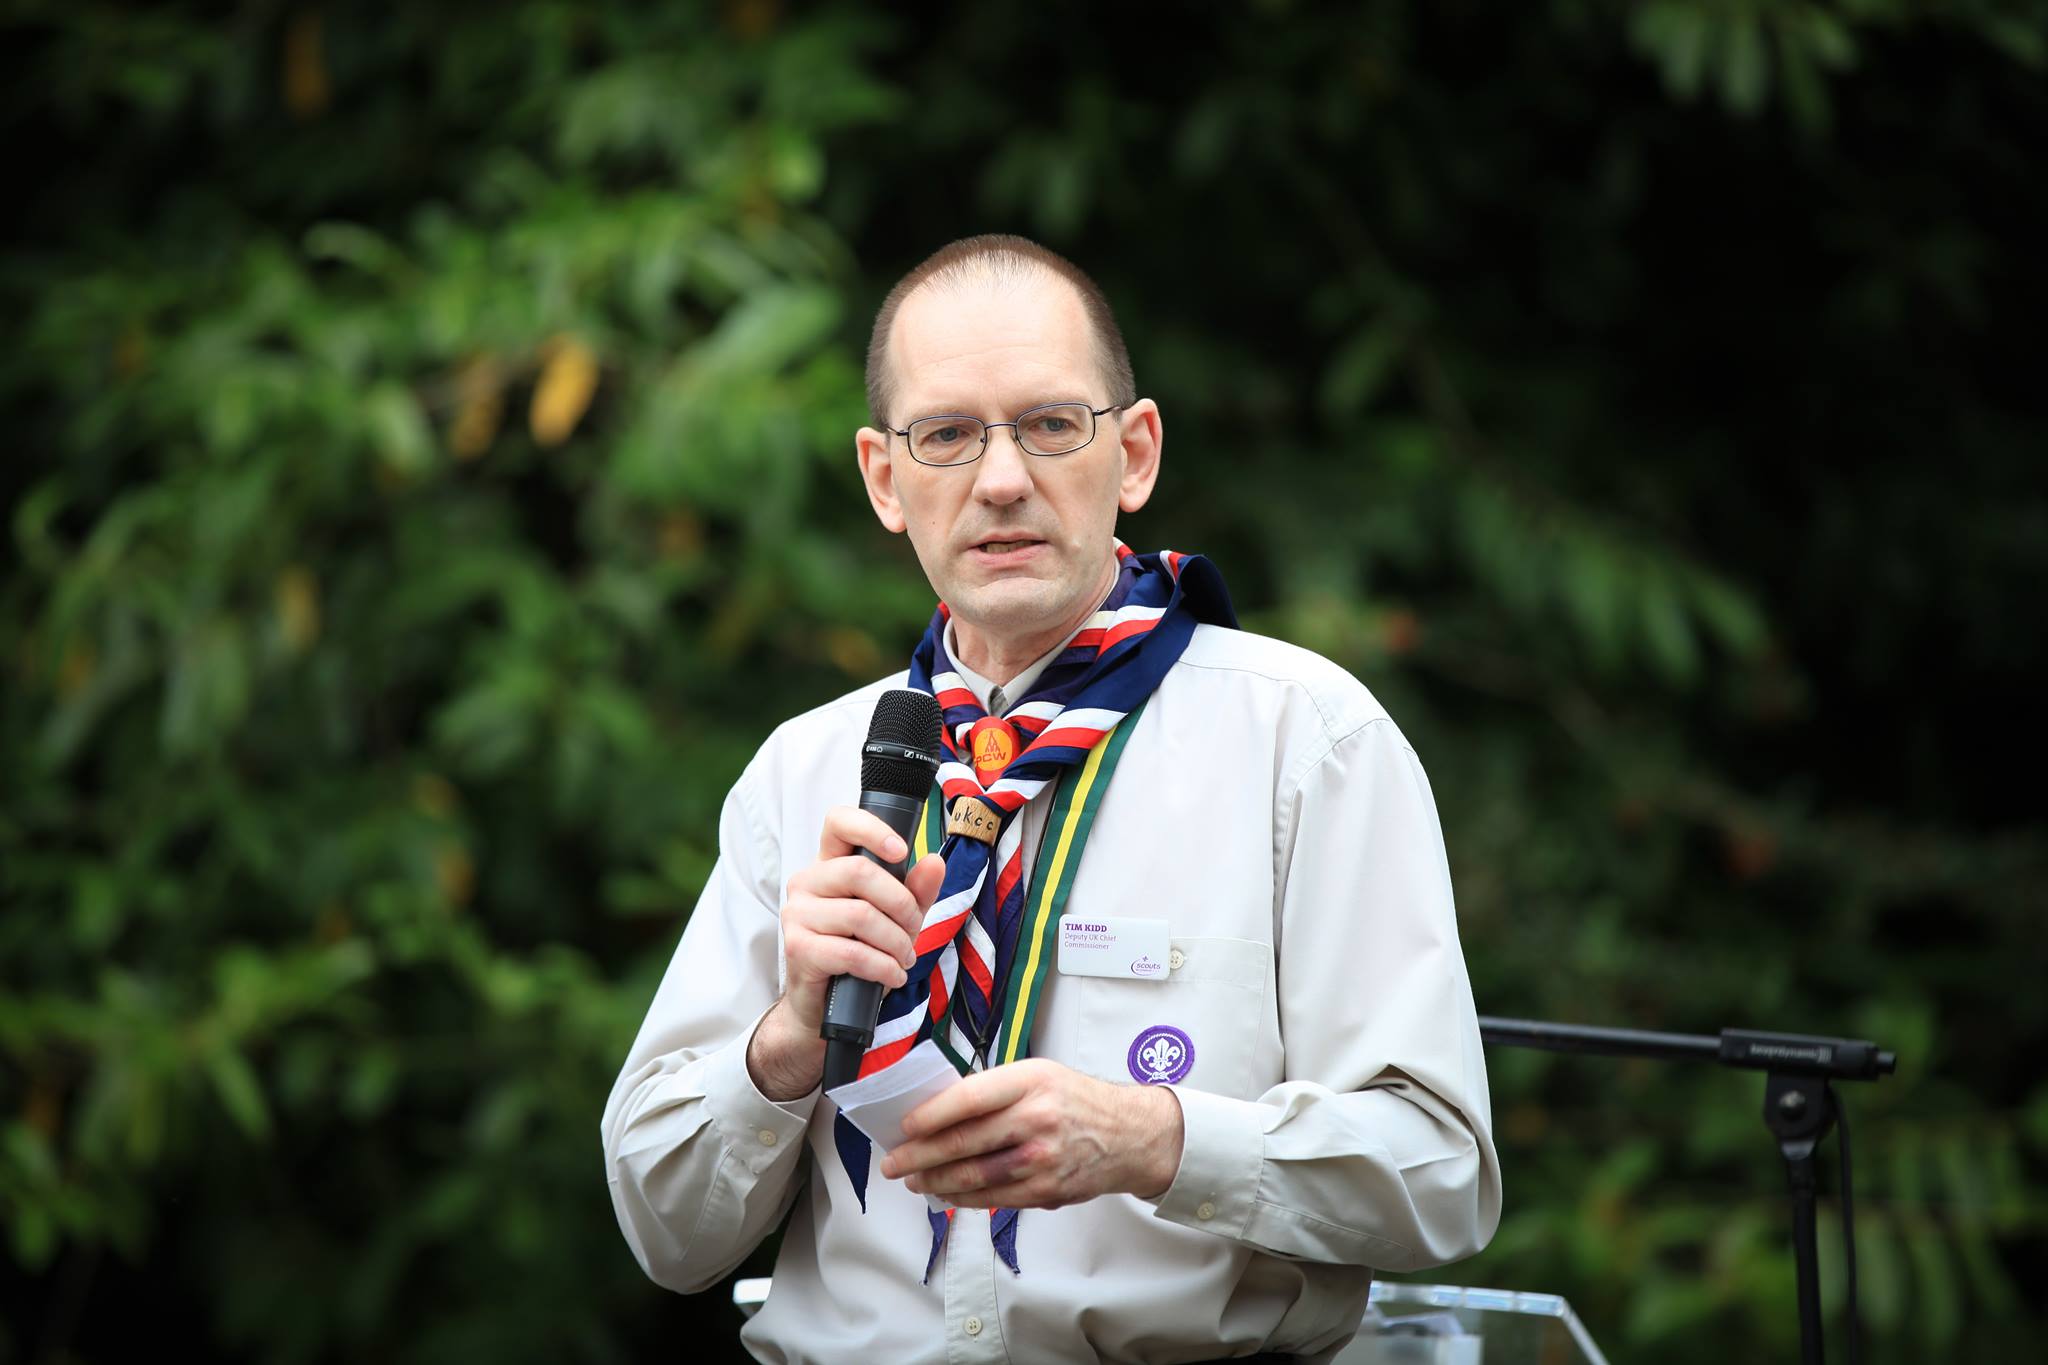 Reunion 2016 – Tim Kidd’s first speech as UK Chief Commissioner